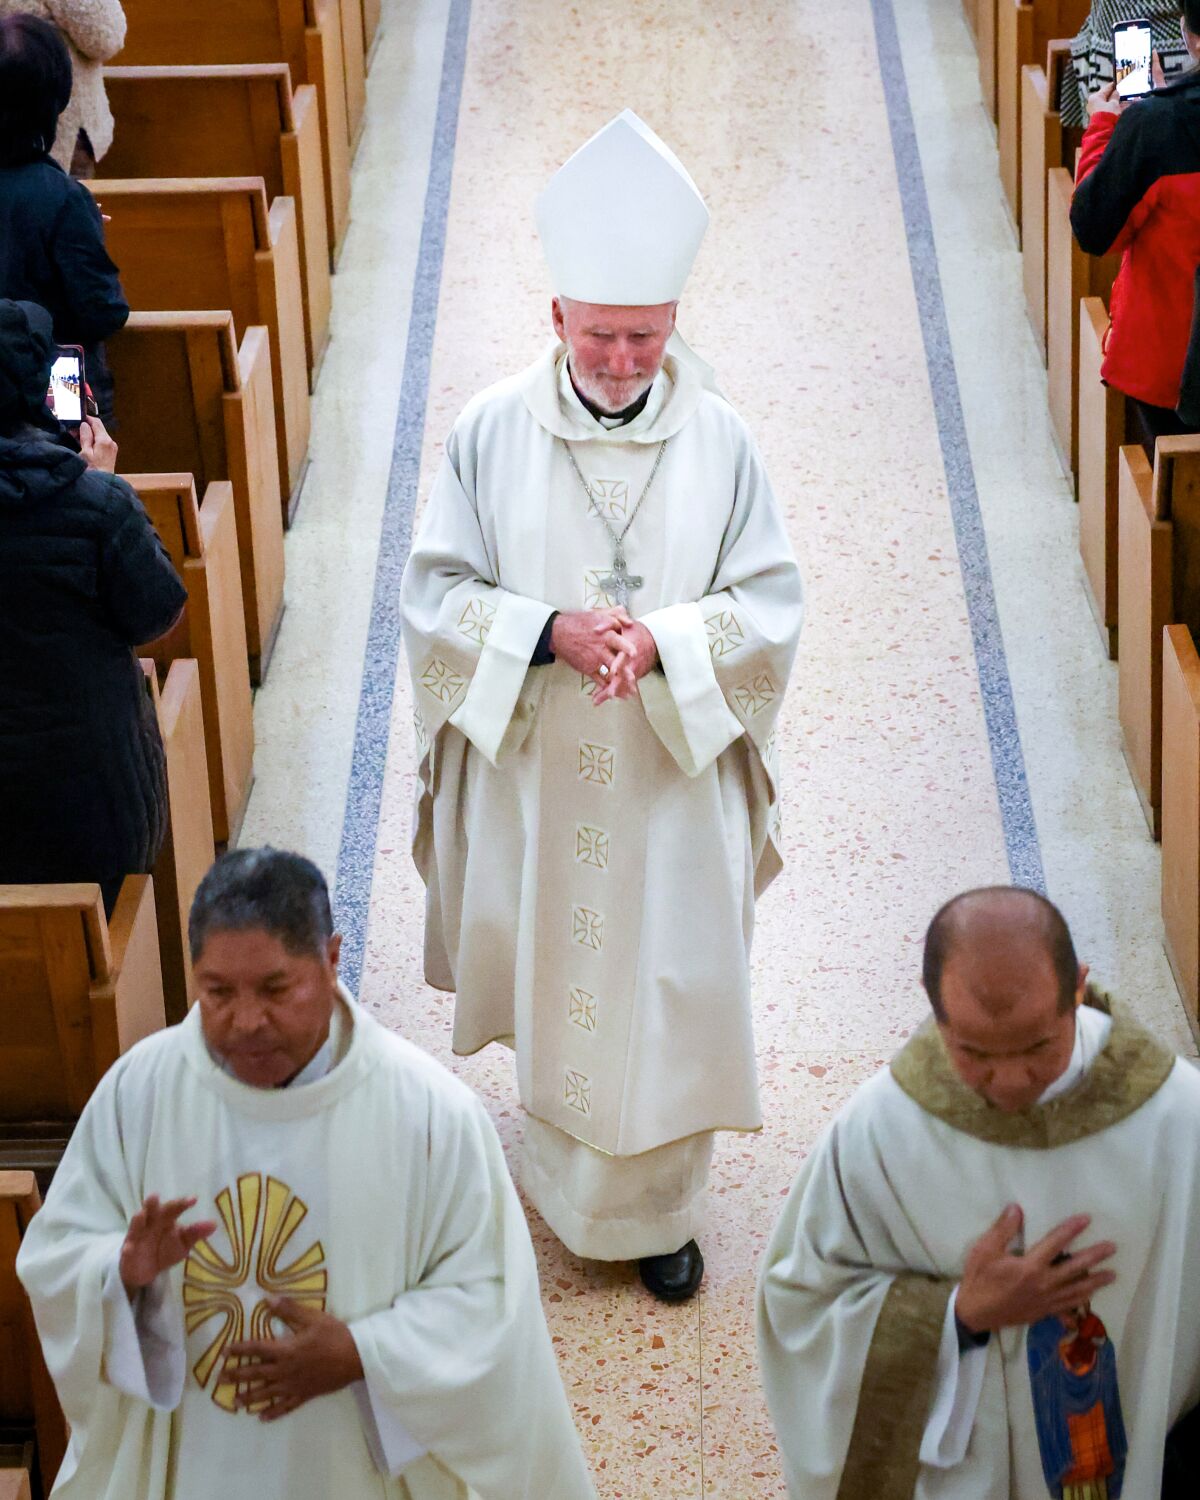 Three clergymen walk down the aisle of a church, between pews, toward the camera.